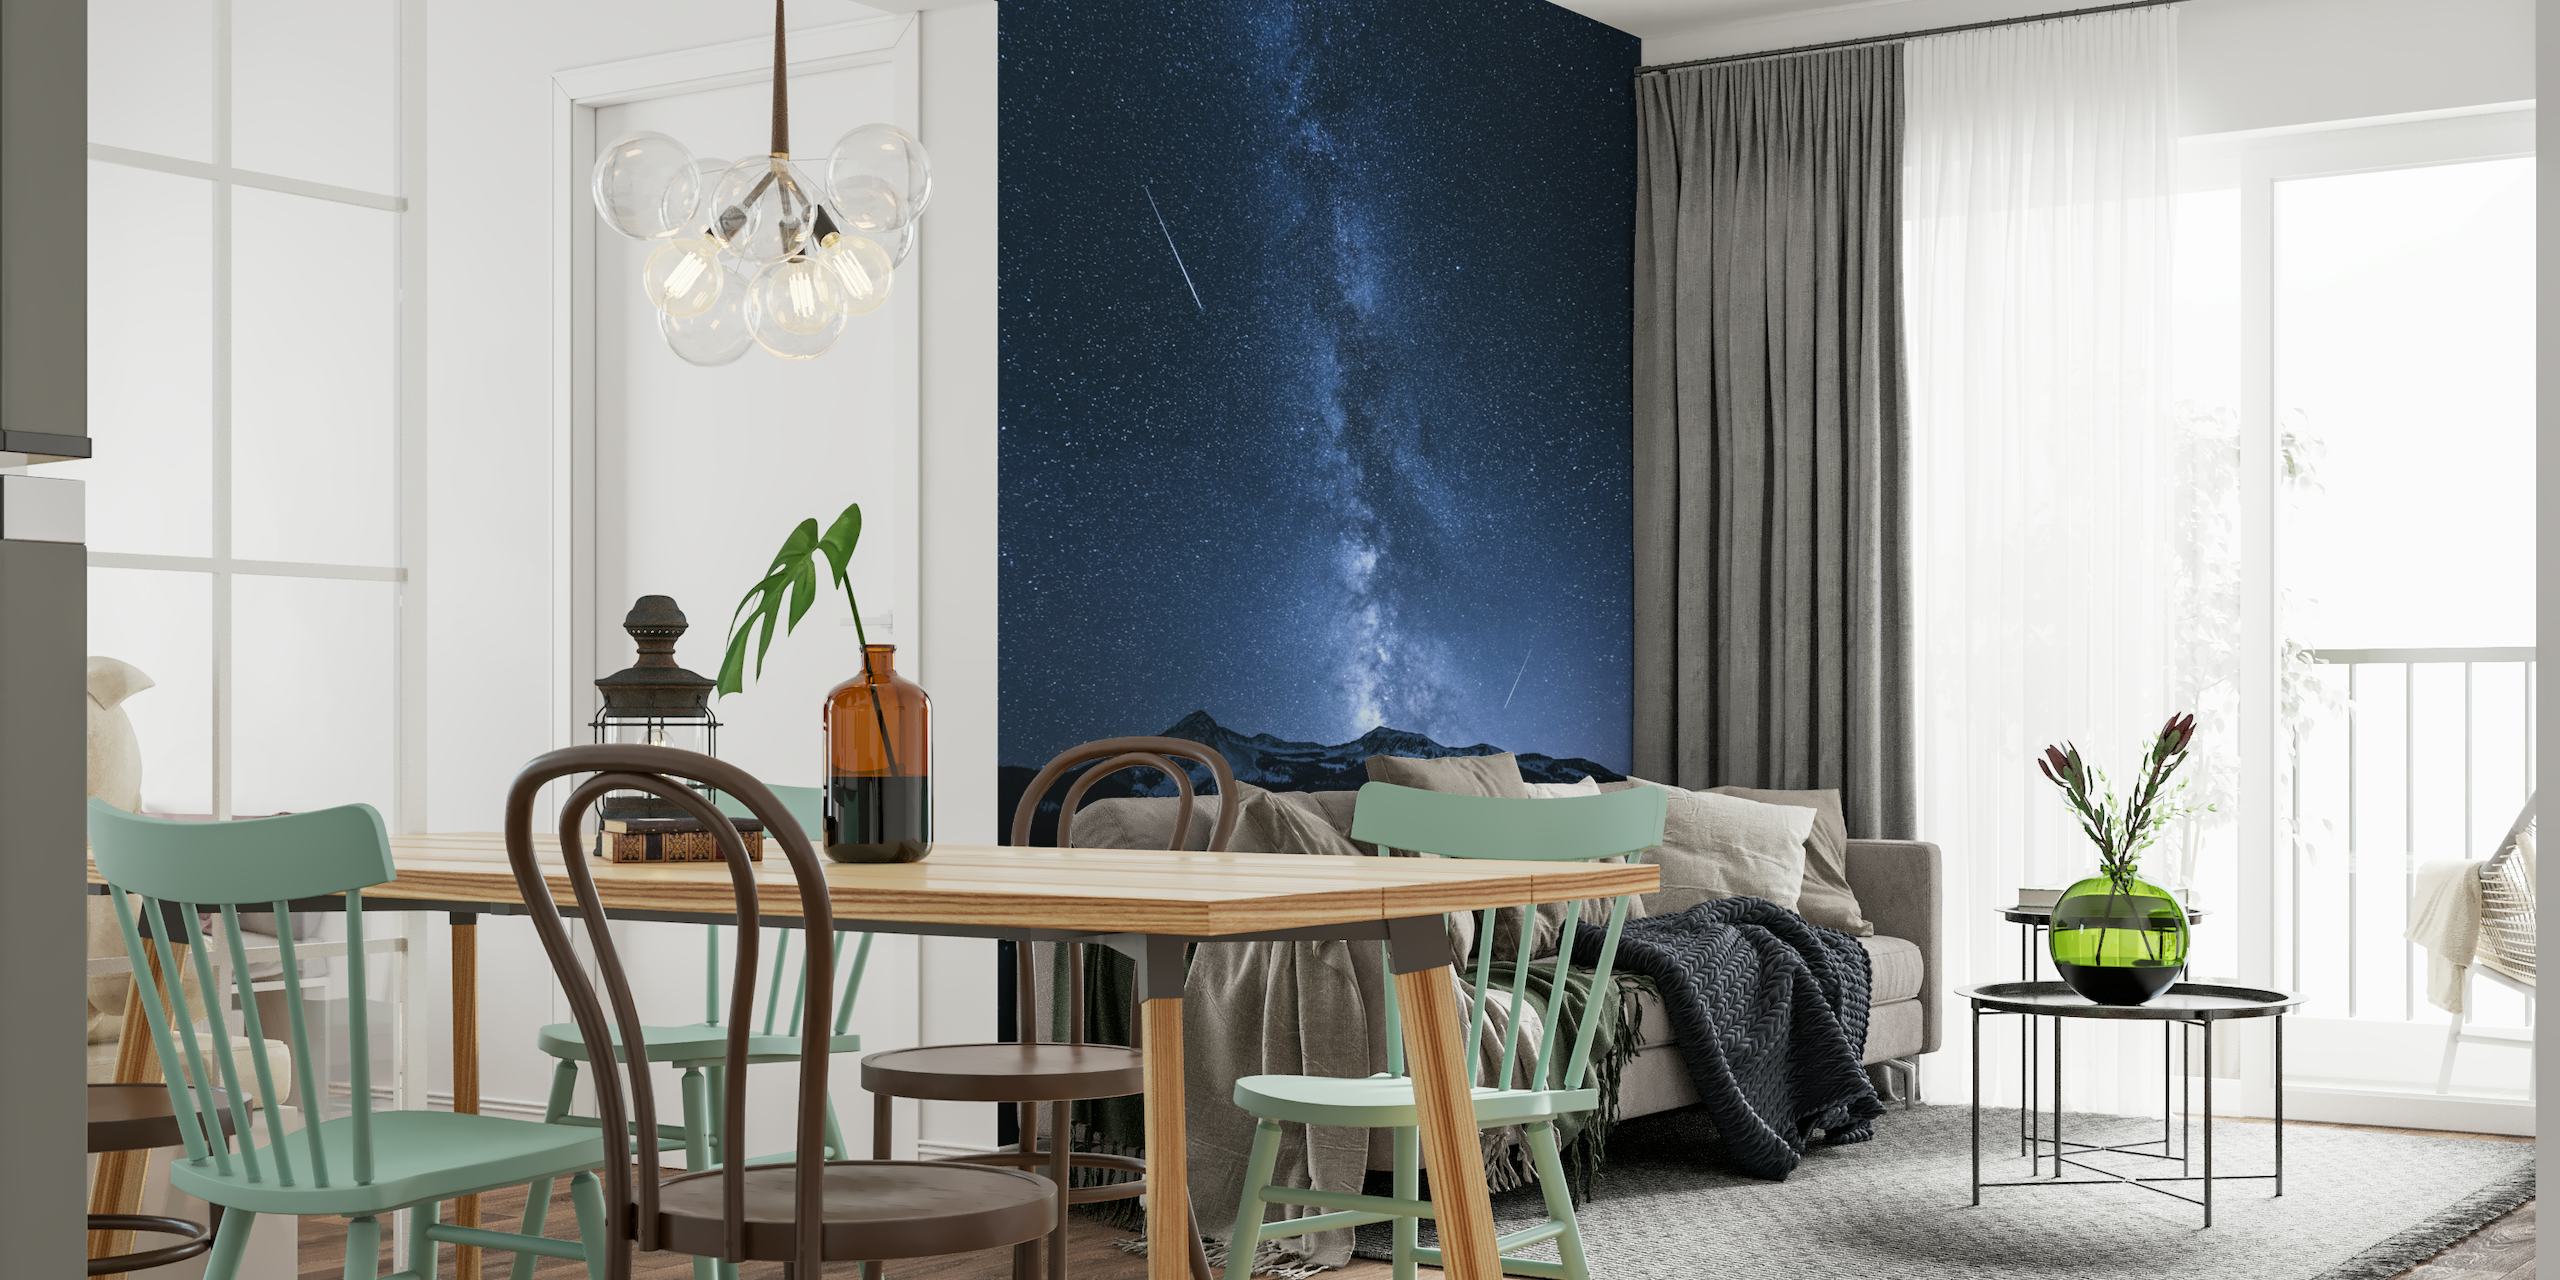 Galaxies Reflection wall mural with mountain lake and starry night sky